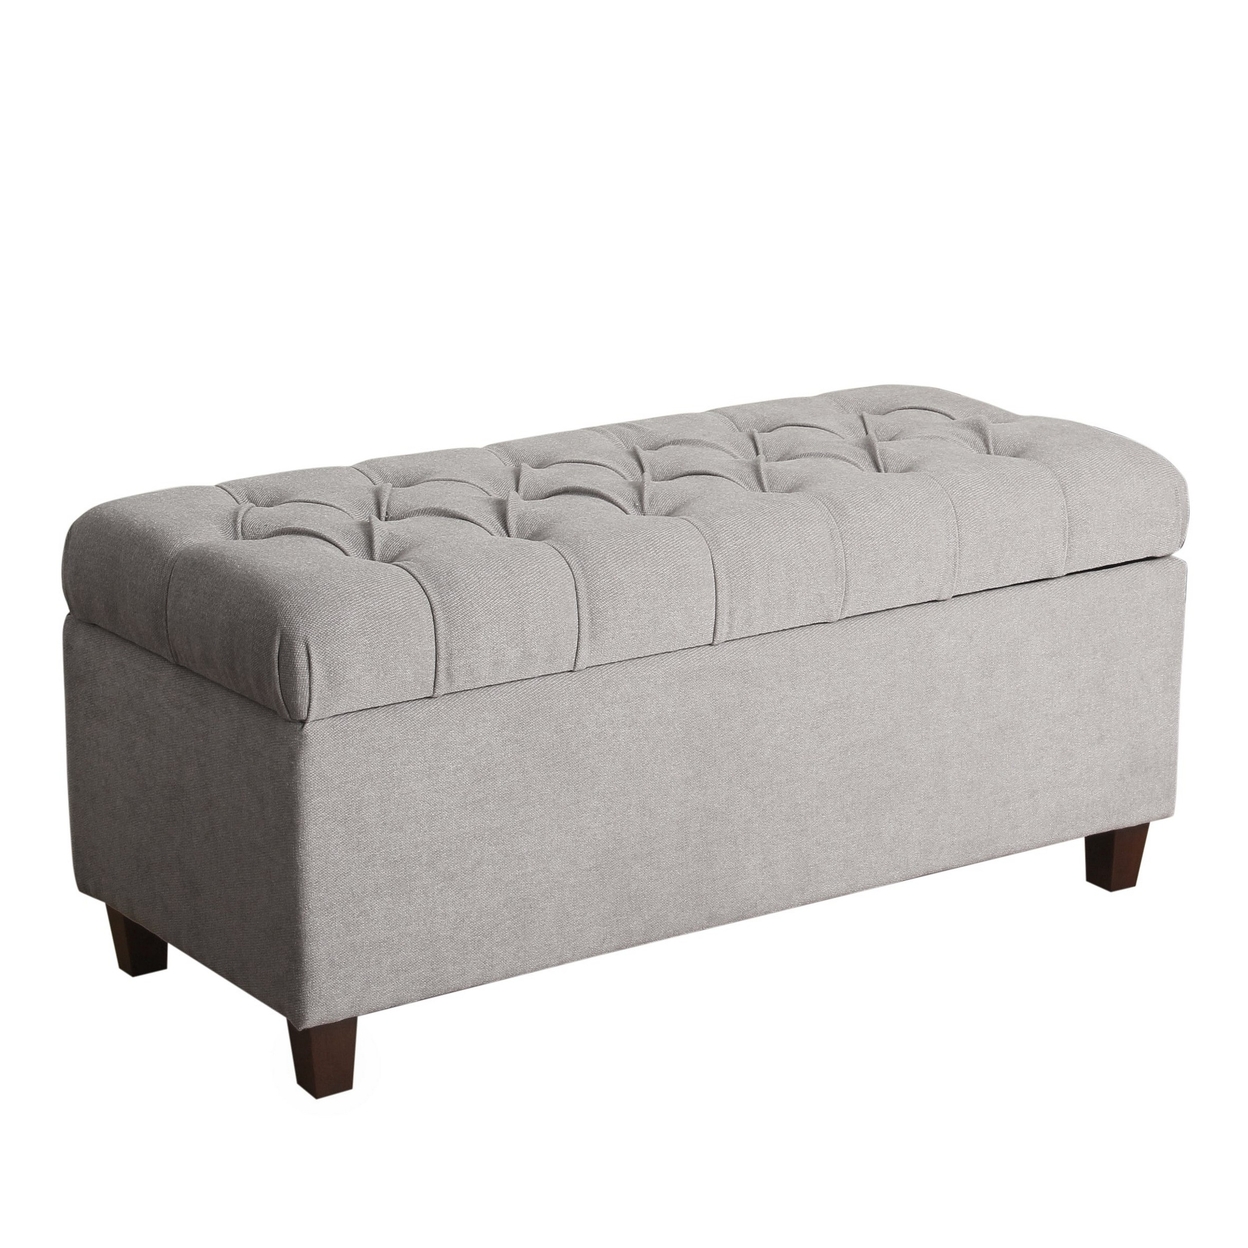 Fabric Upholstered Button Tufted Wooden Bench With Hinged Storage, Gray And Brown- Saltoro Sherpi